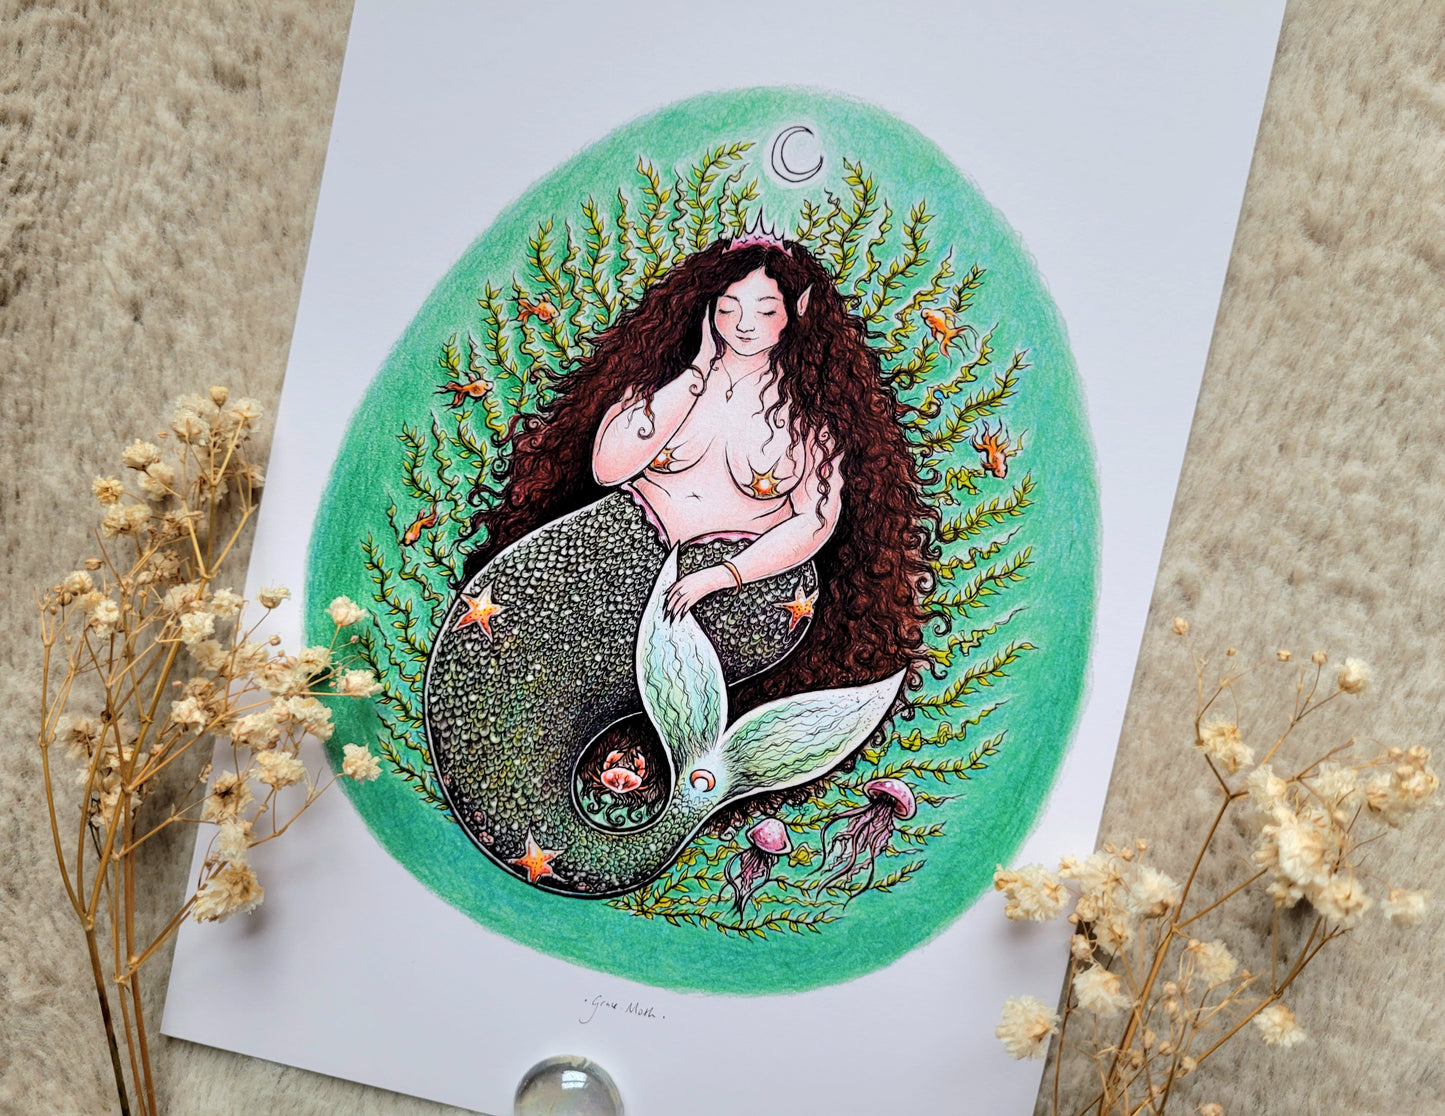 Mermaid Queen 1 - A5 or A4 body positive art print by Grace Moth